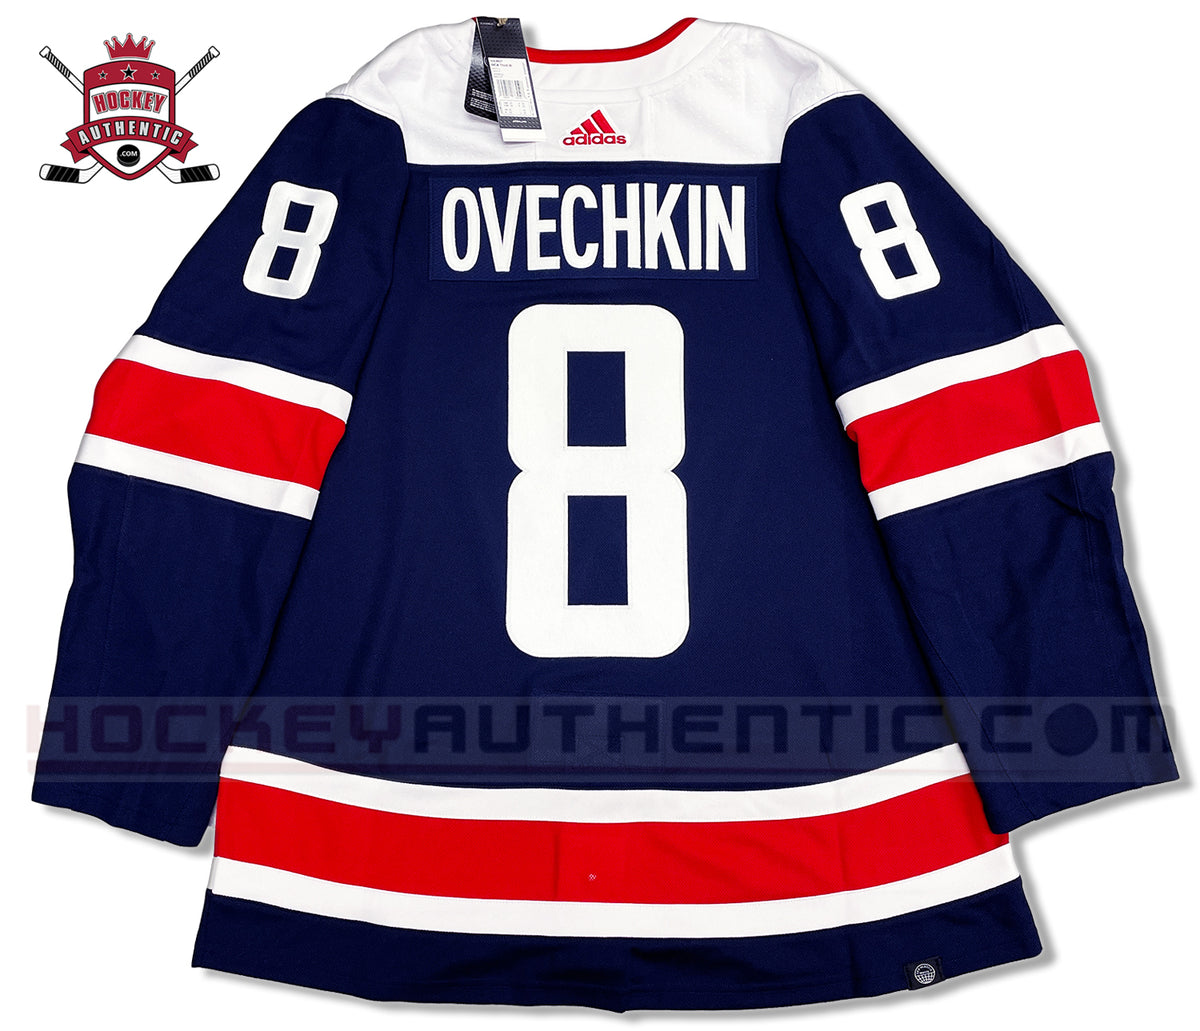 The Capitals New Winter Classic Jersey